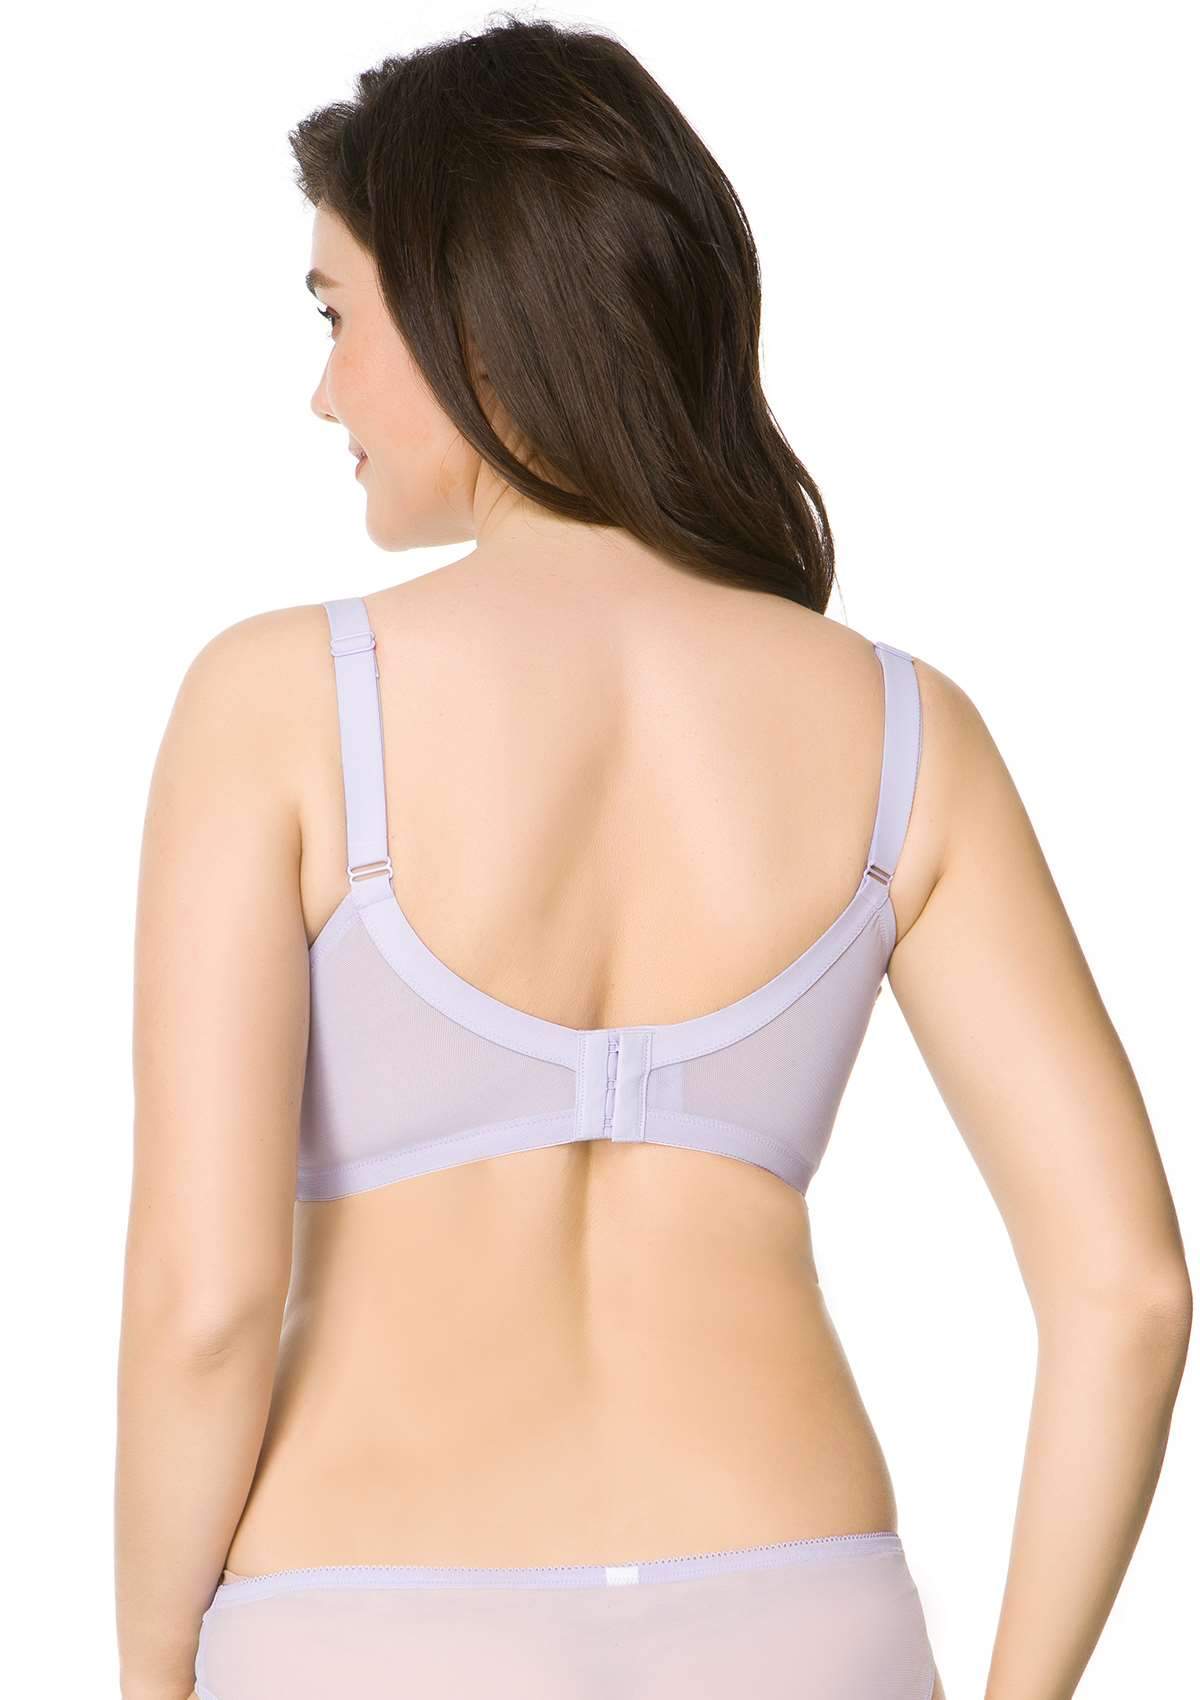 HSIA Wisteria Bra For Lift And Support - Full Coverage Minimizer Bra - Light Pink / 40 / C